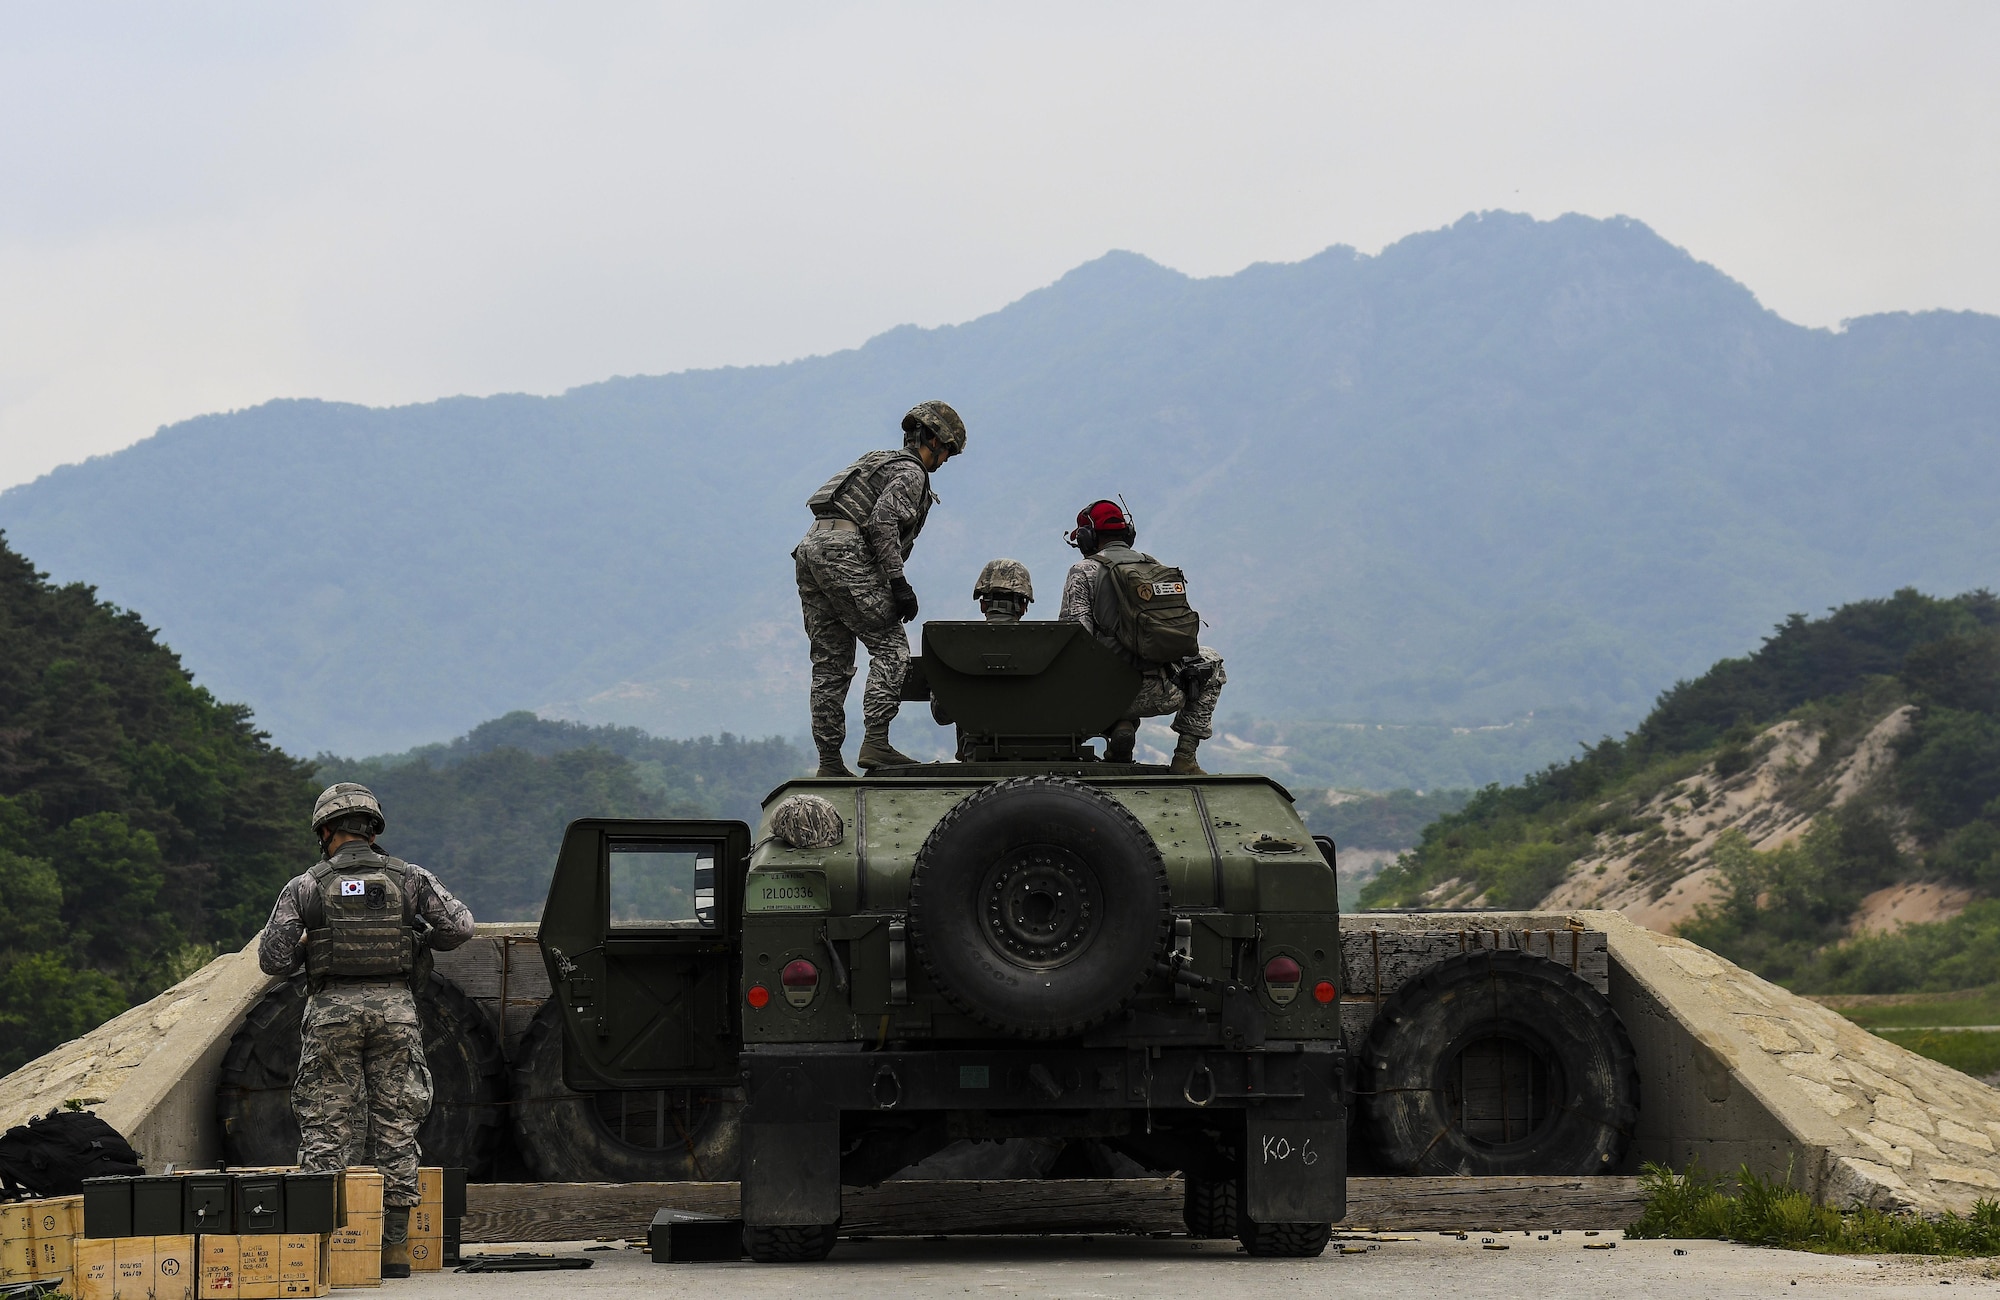 Defenders from the 51st and 8th Security Forces Squadrons participate in weapons training at Camp Rodriguez, Republic of Korea, May 23, 2017. During the training, Defenders qualified on the MK-19 grenade launcher, M2 machine gun and the M24 sniper rifle. (U.S. Air Force photo by Airman 1st Class Gwendalyn Smith)